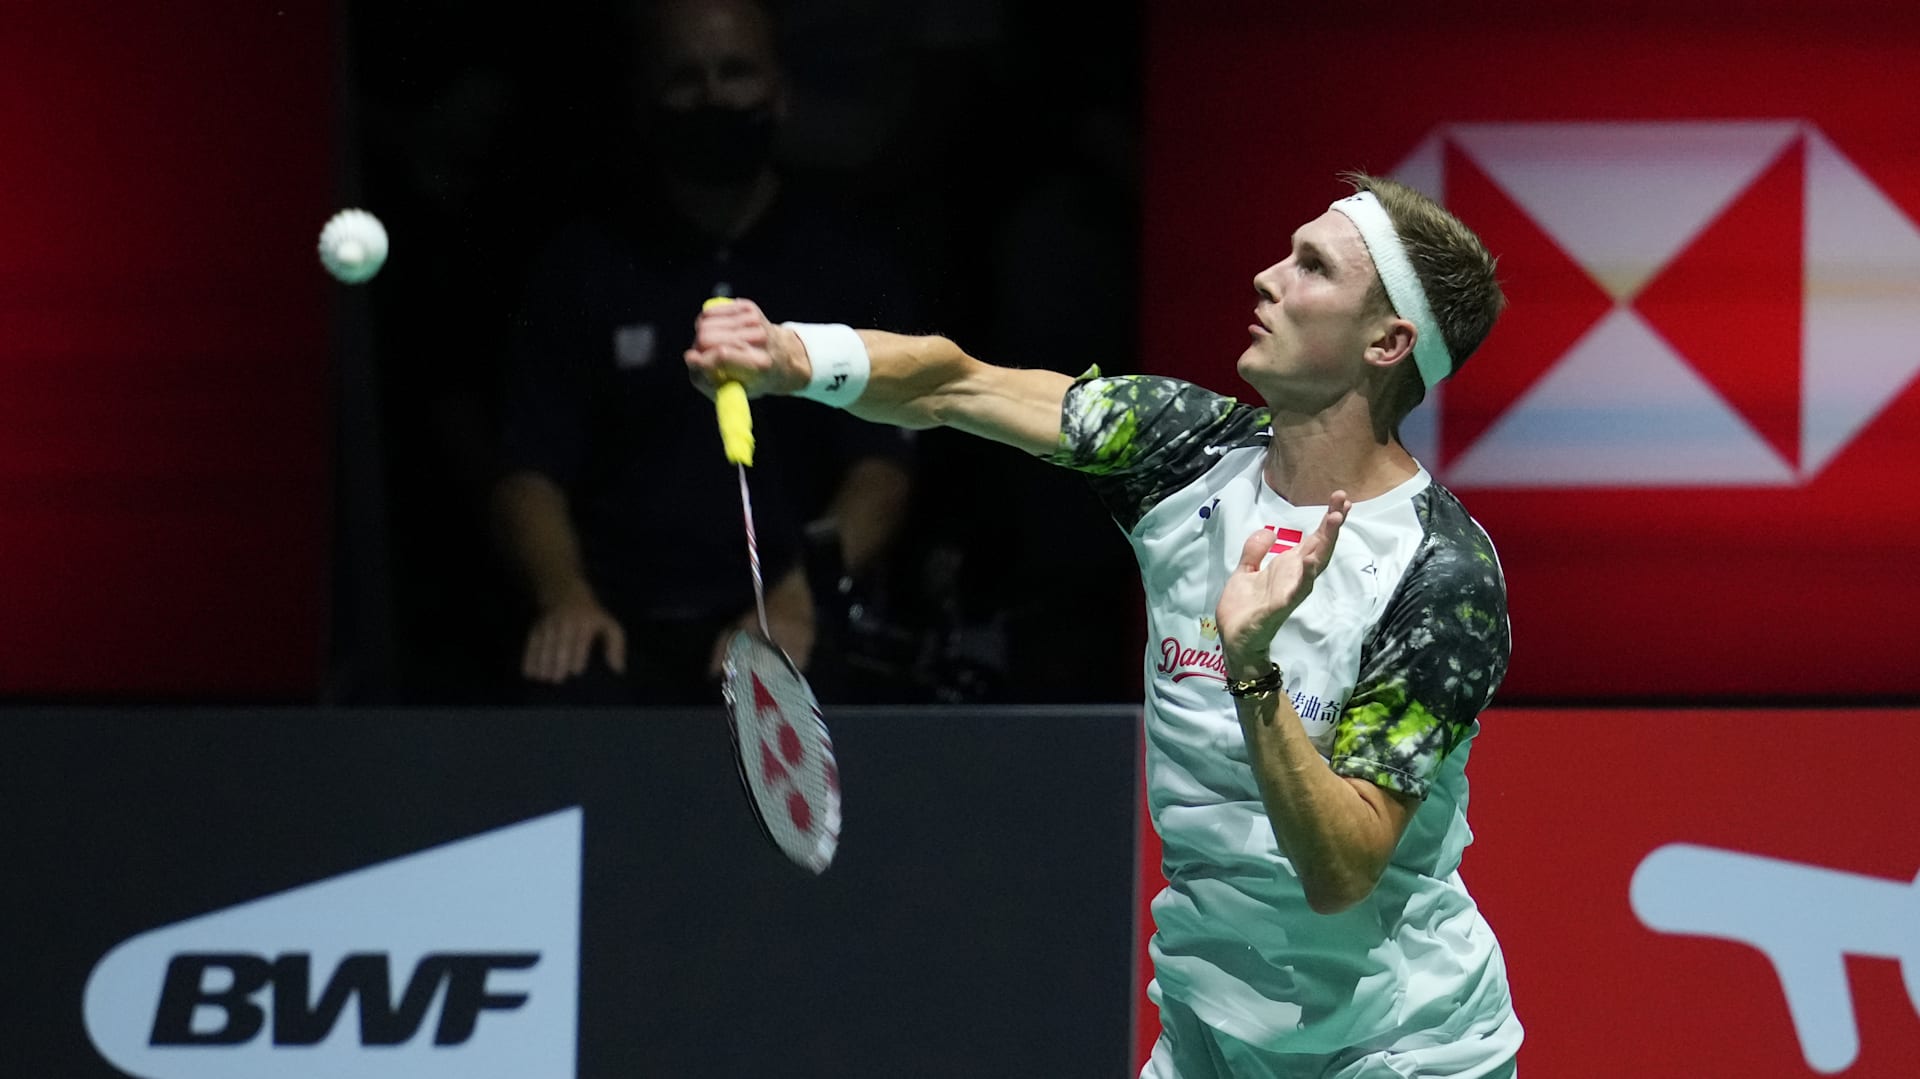 væbner tandlæge last Malaysia Open badminton 2023 - Viktor Axelsen comes through first-round  scare against compatriot Ramus Gemke - Results